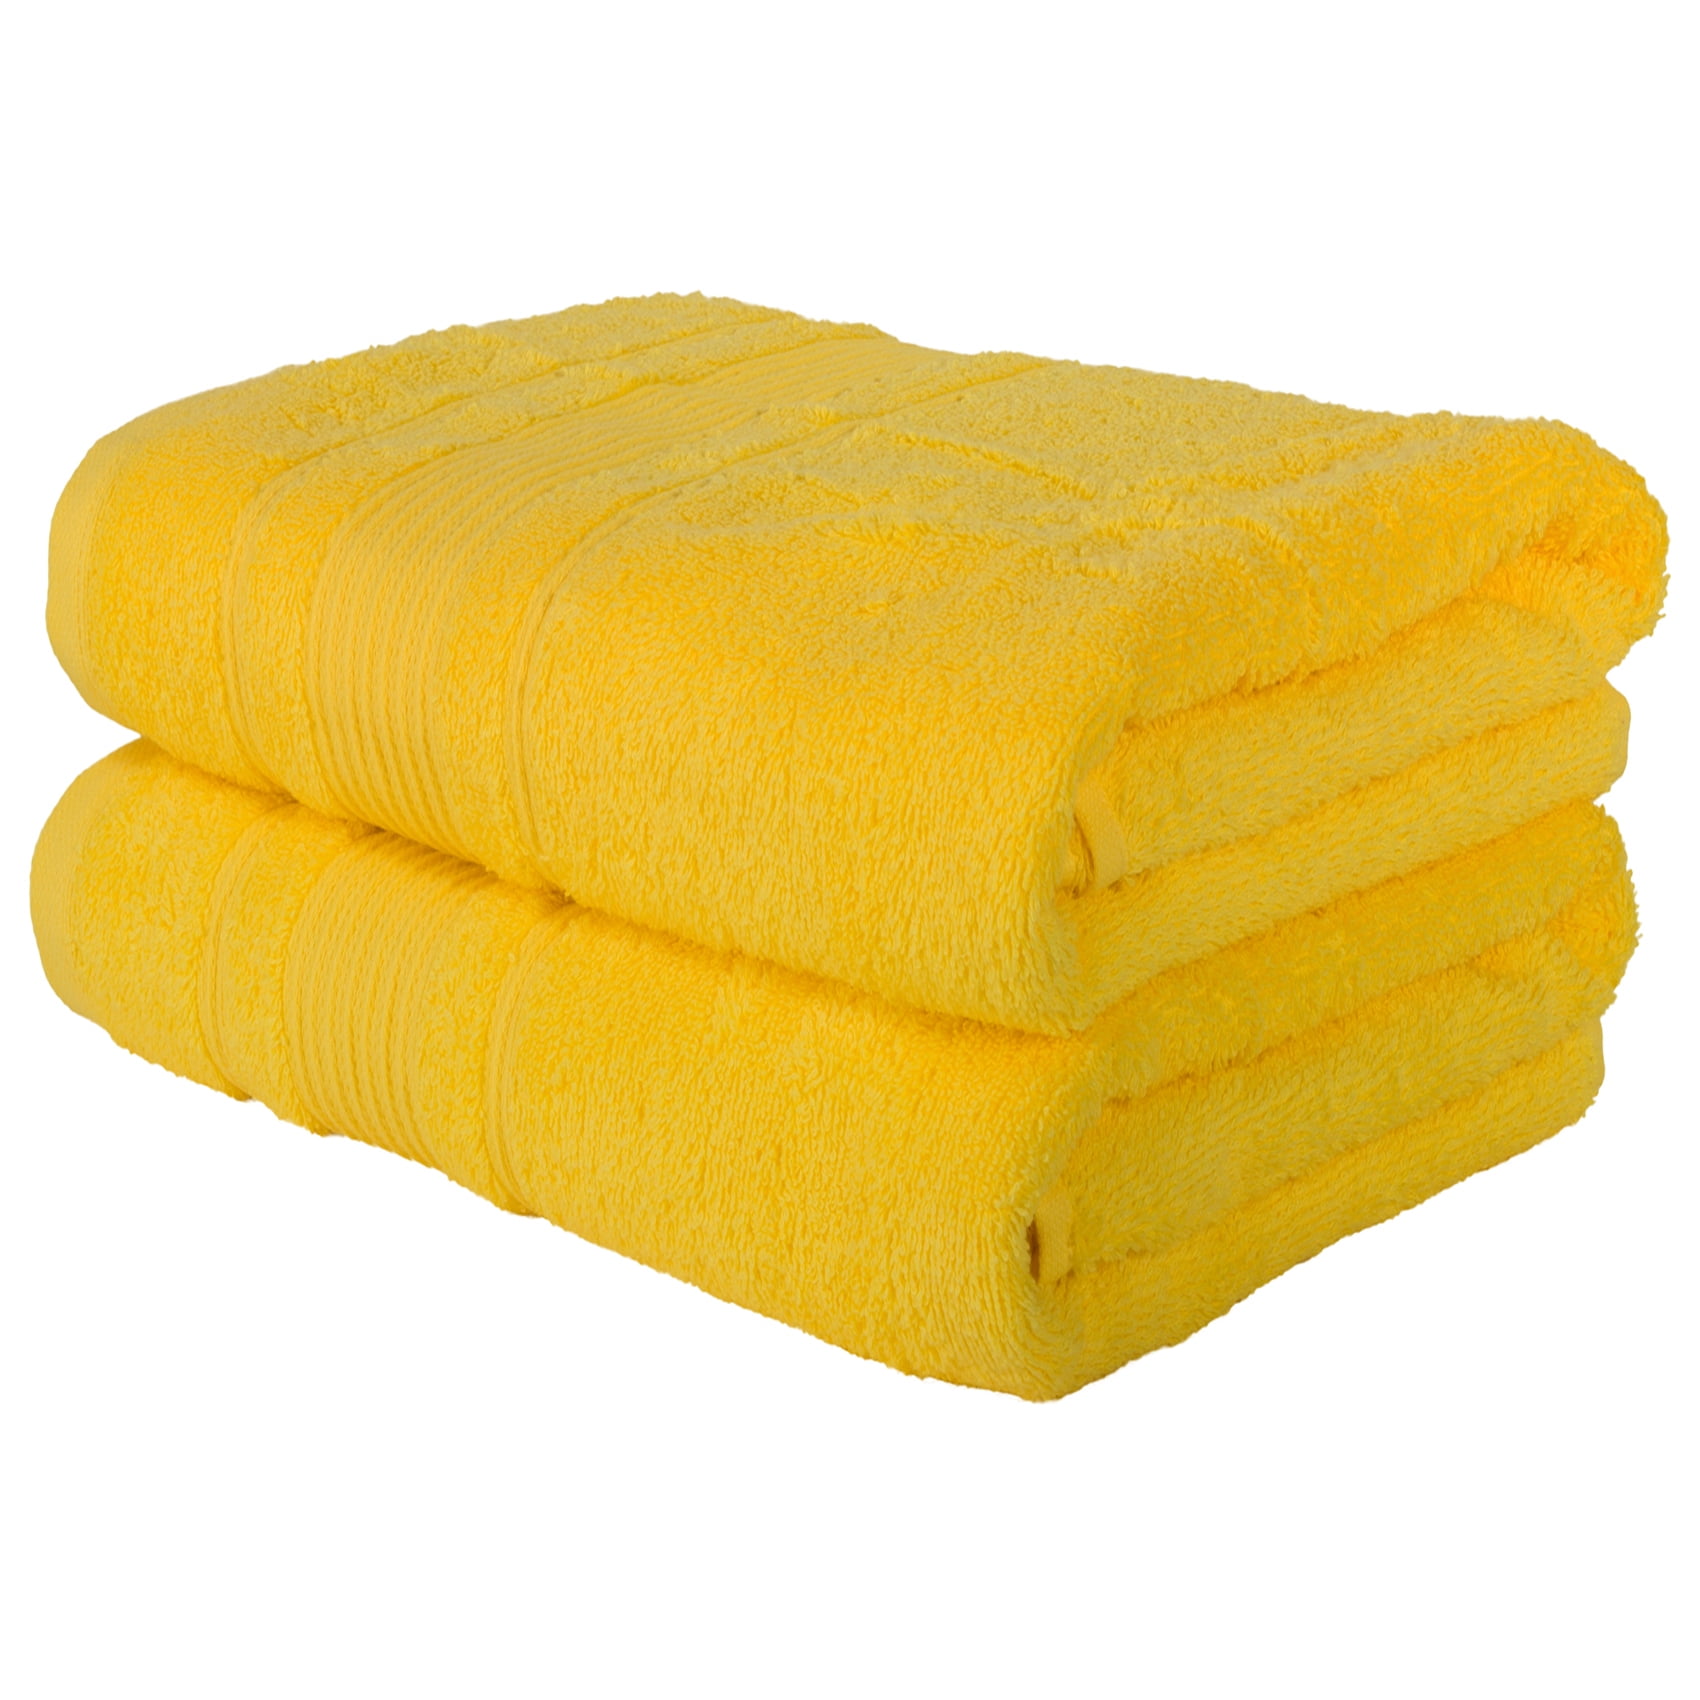 30x60 Super Soft and Ultra Absorbent for Bathroom & Washroom-Yellow Oversized Extra Large Cotton Bath Towel Hotel & Spa Quality